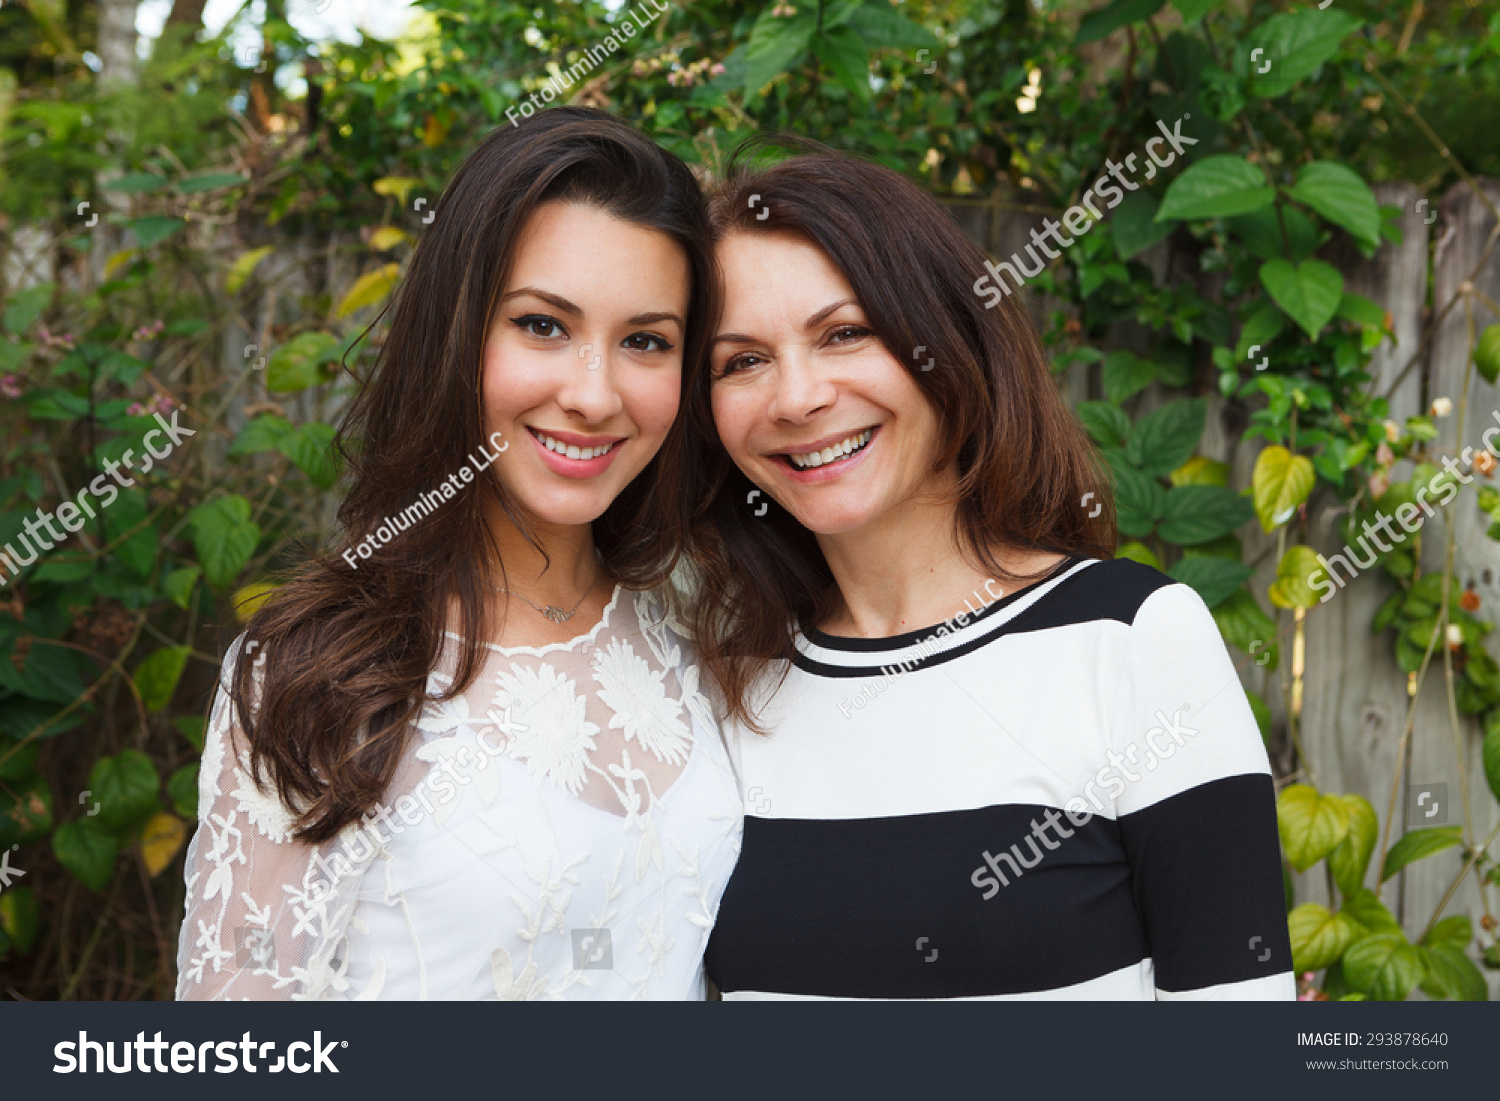 Mother and daughter portrait in a outdoor setting. #293878640